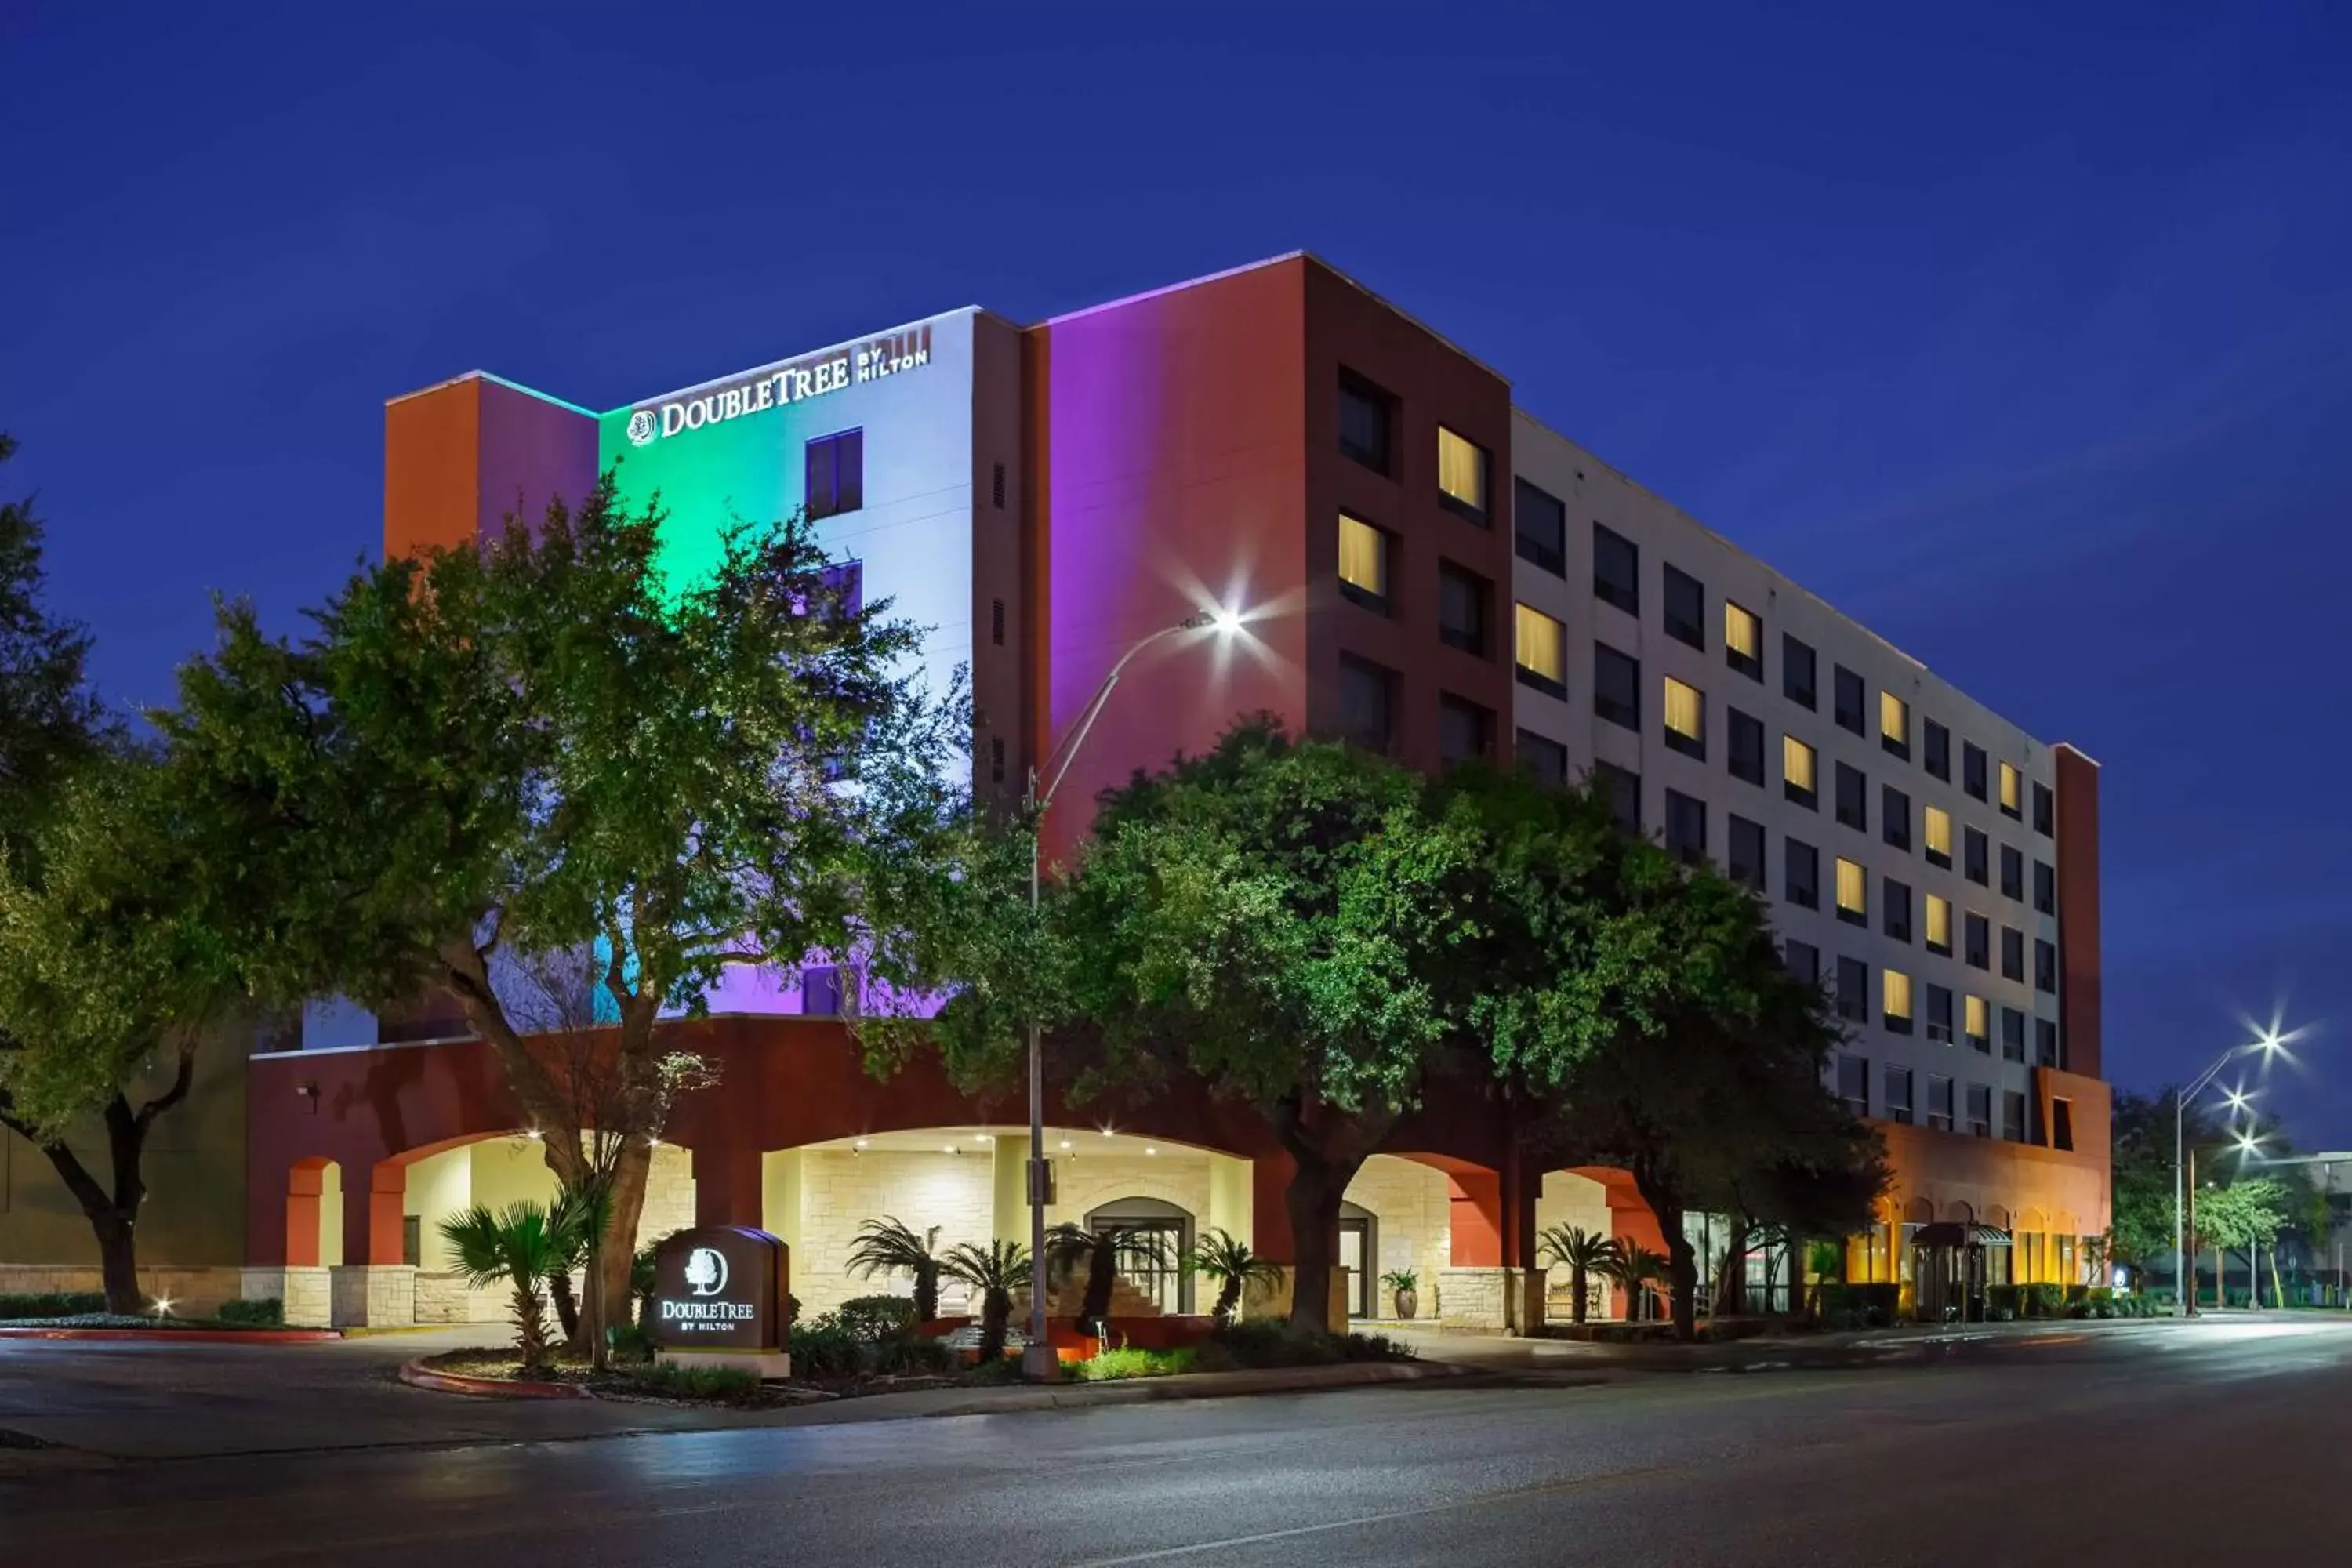 Property Building in DoubleTree by Hilton San Antonio Downtown